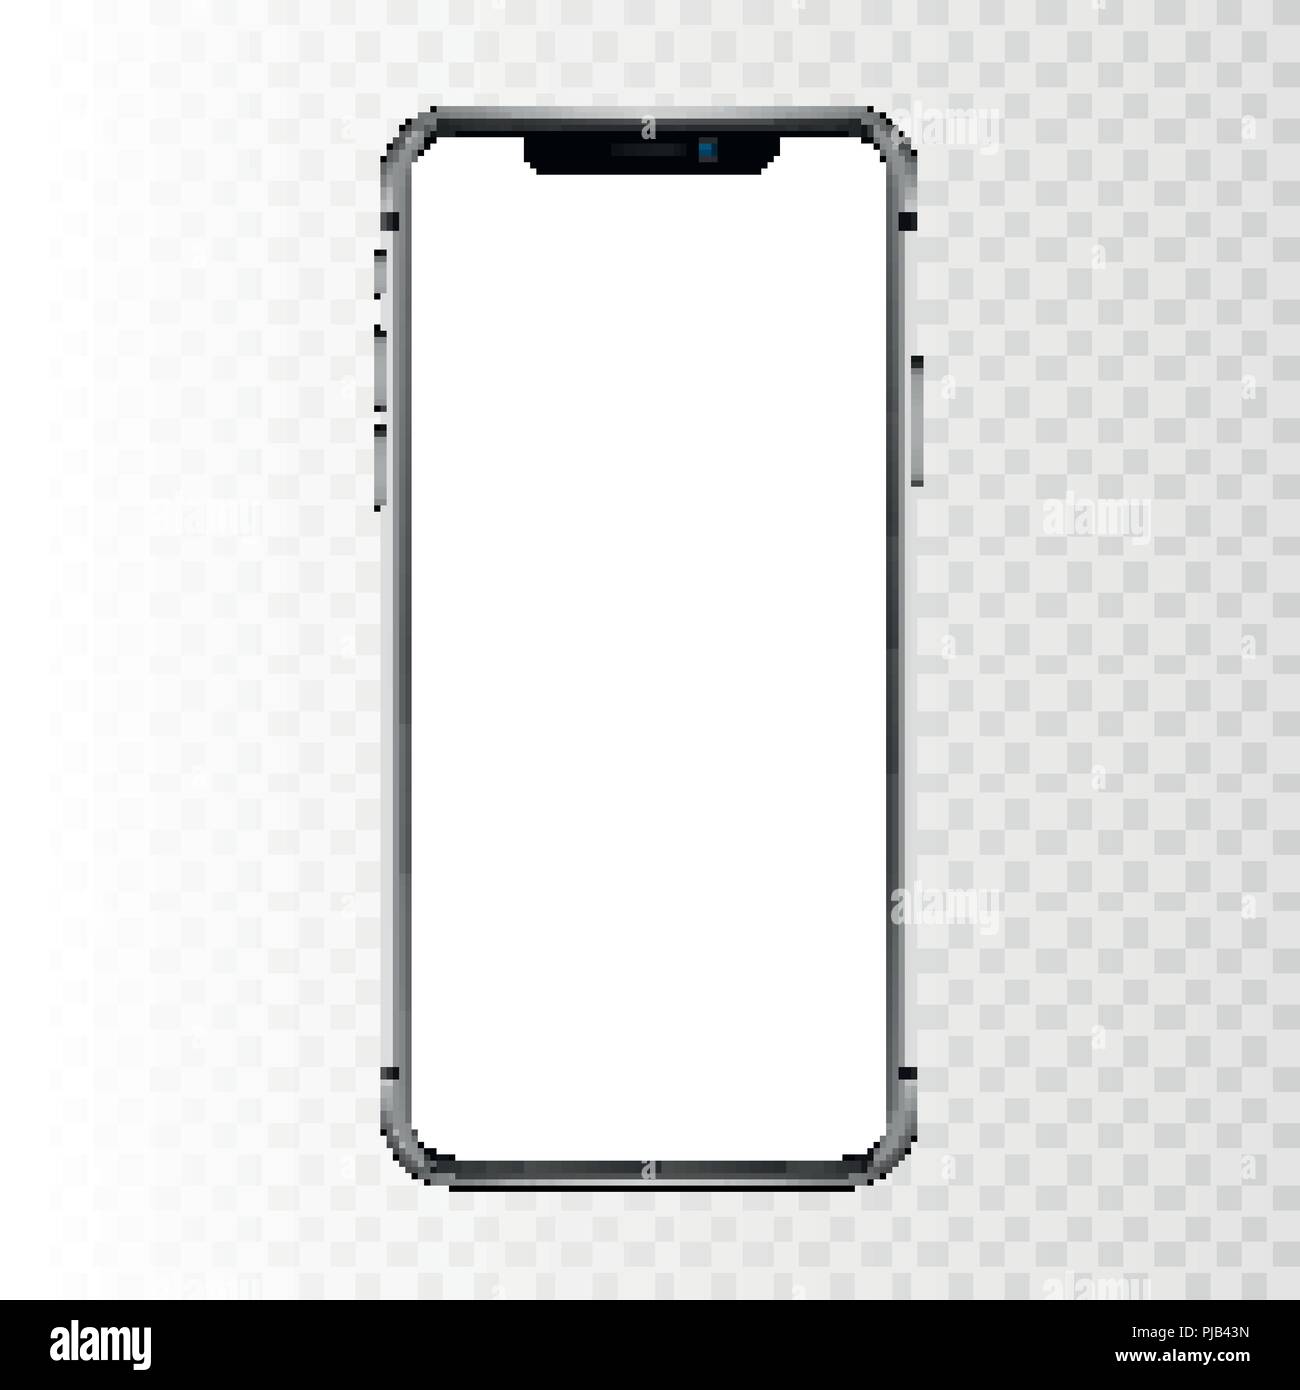 New York, USA - August 22, 2018: realistic new black phone. Frameless full screen mockup mock-up smartphone isolated on transparent checkered background. Front view. EPS10 Stock Vector